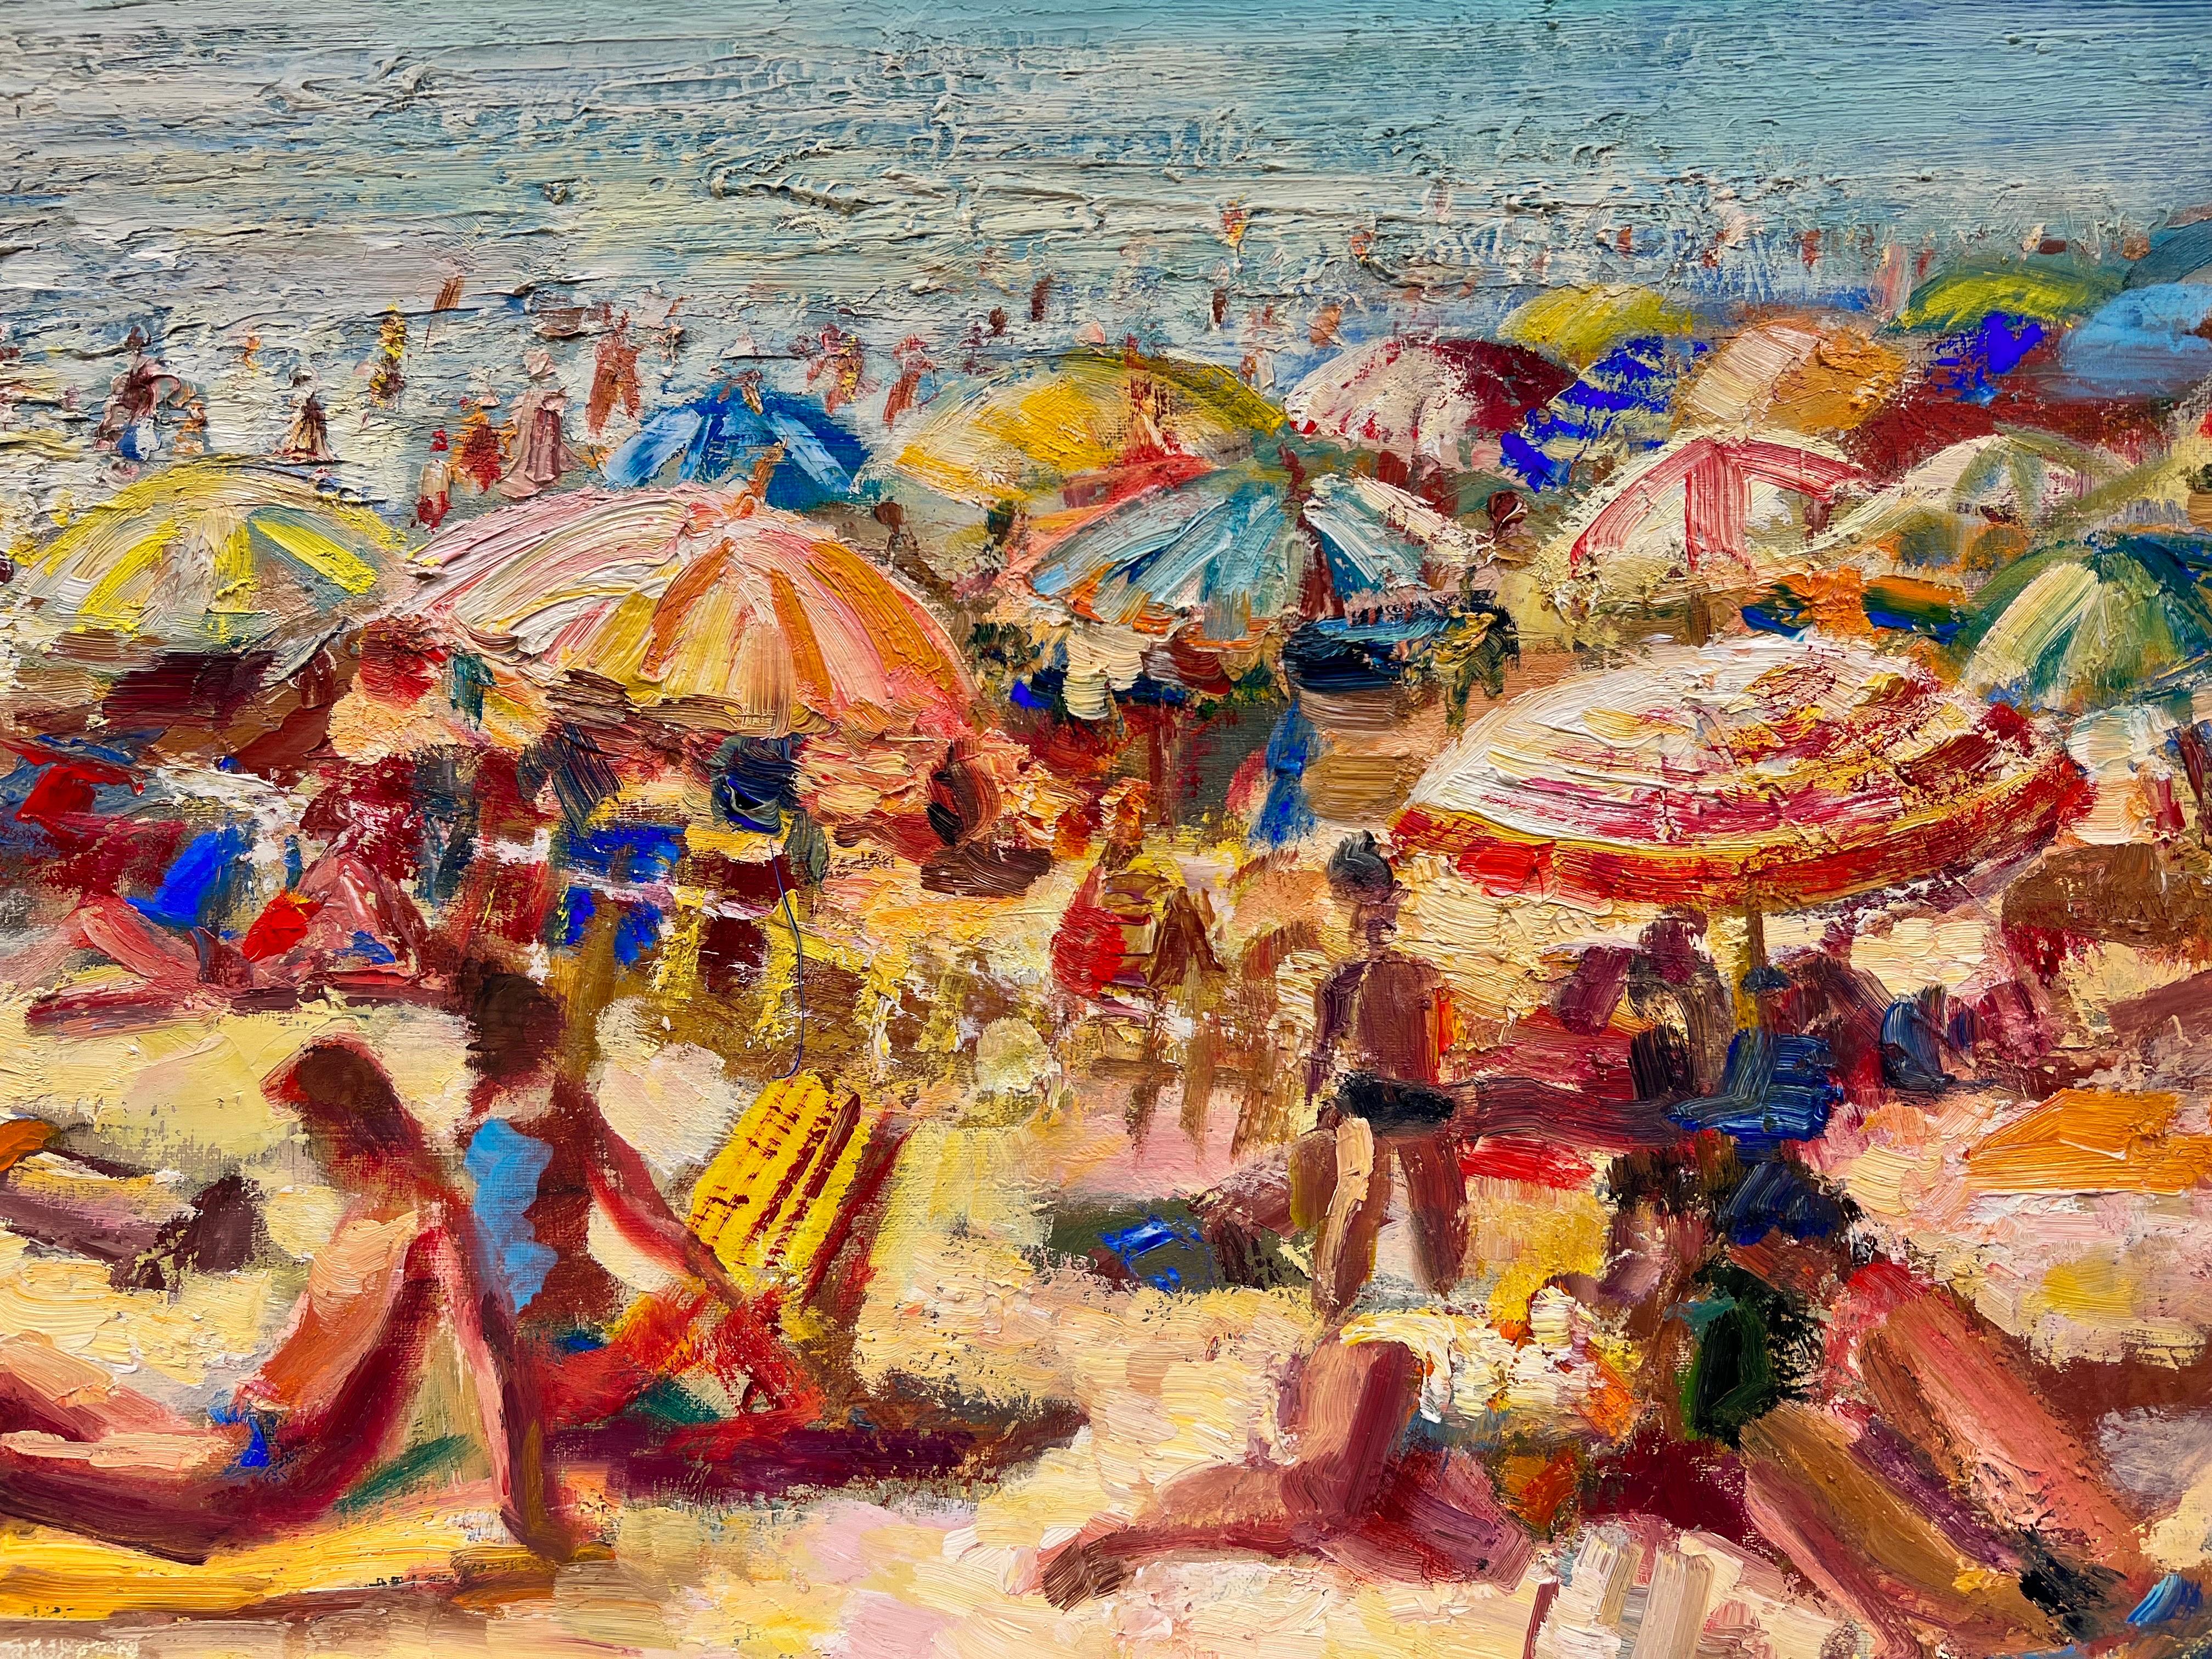 20th French Post Impressionist Oil Busy Summer Beach Scene Many Figures & Color - Post-Impressionist Painting by Josine Vignon